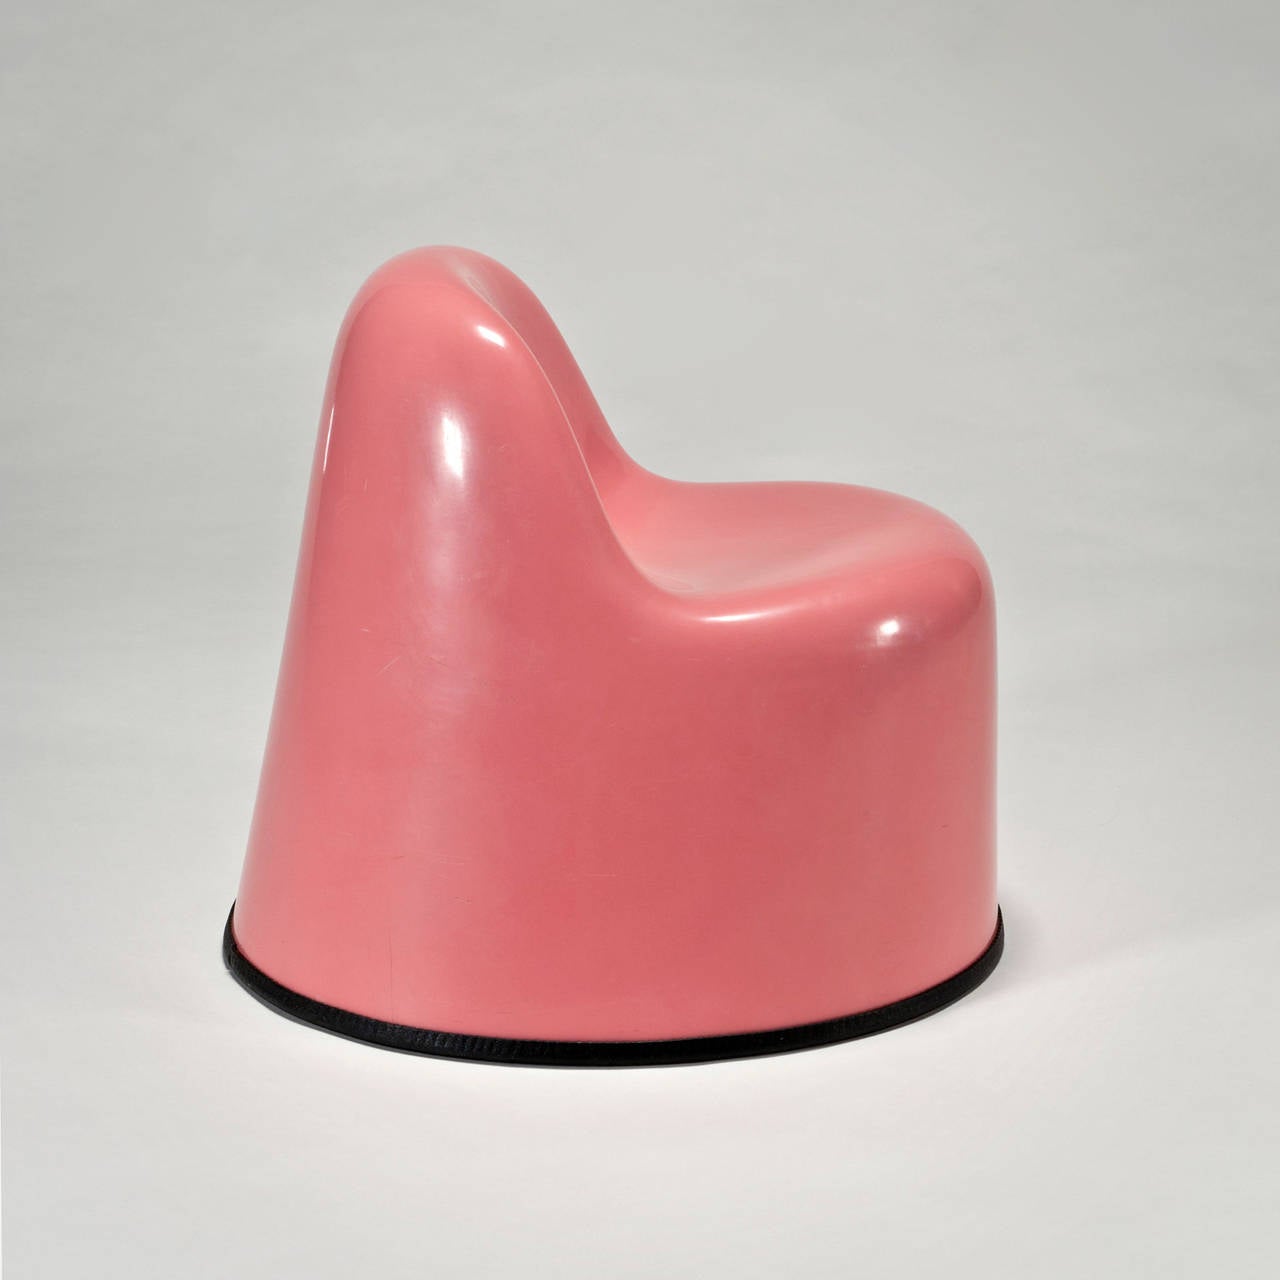 Organic Modern 1970s Molar Chair, Child's Version, by Wendell Castle